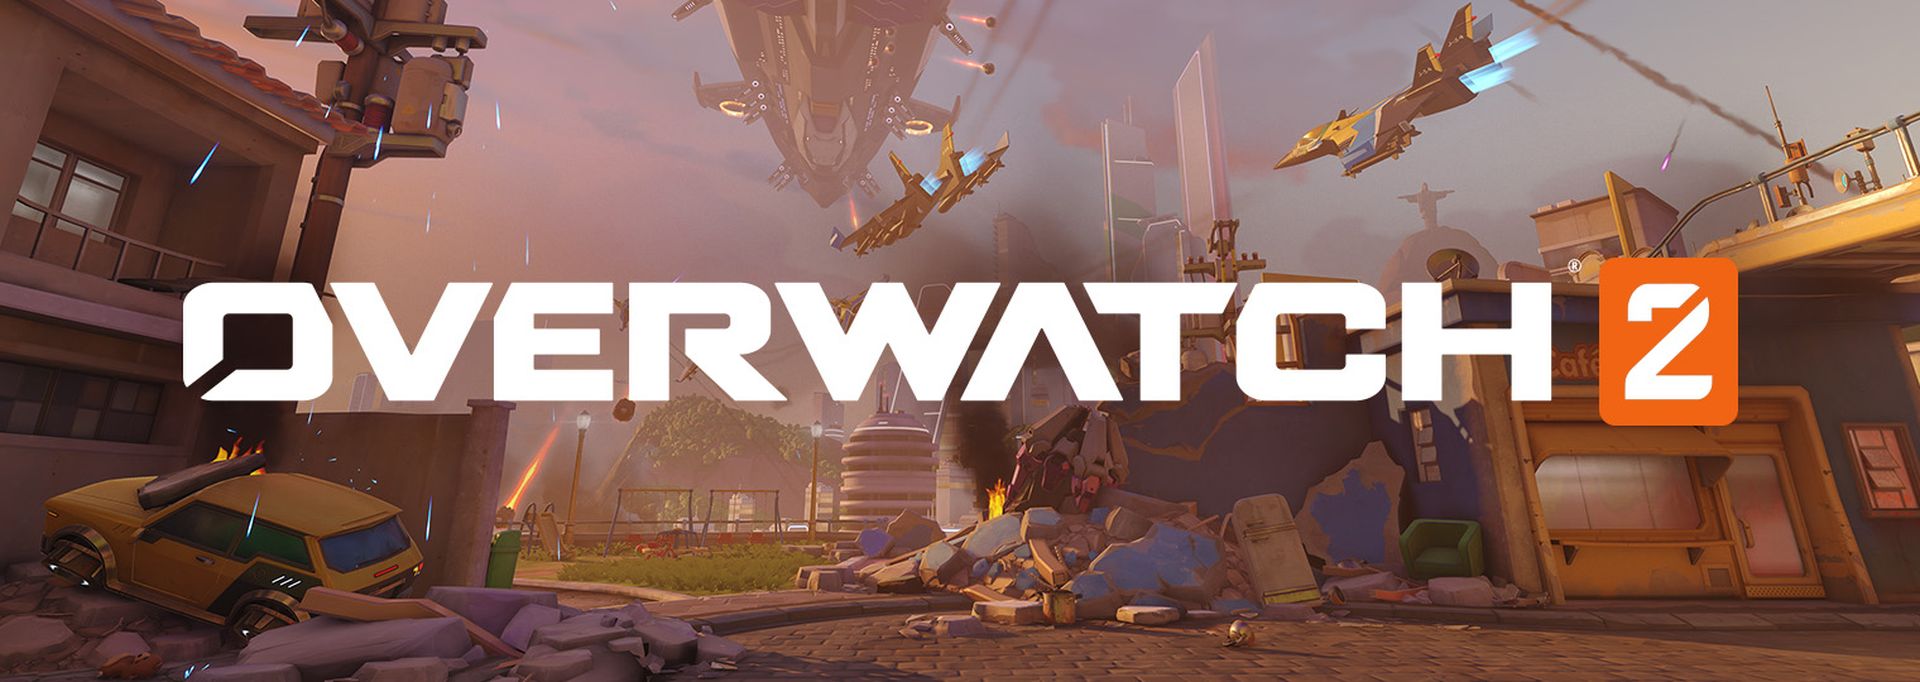 In this article, we are going to go over how to fix Overwatch 2 beta login error, so you can enjoy the beta testing as much as possible and without delay.